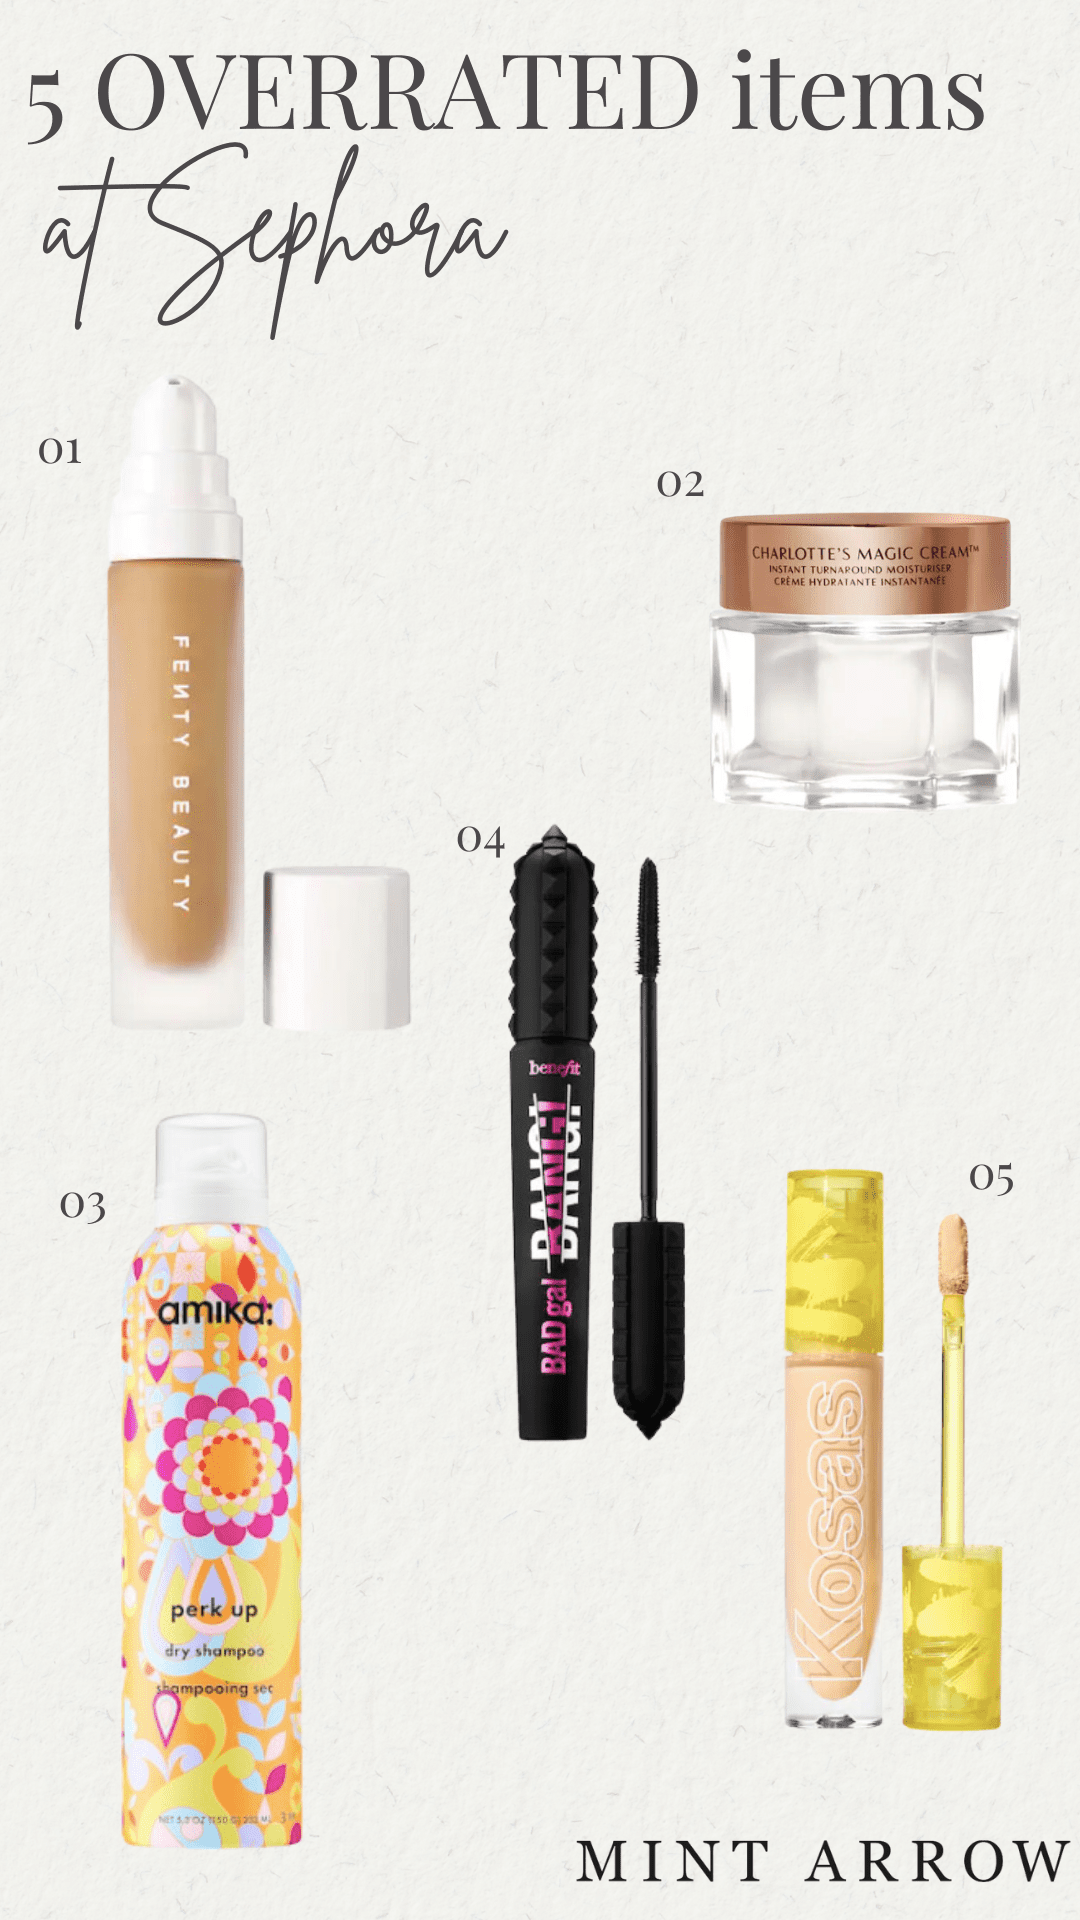 overrated products at sephora